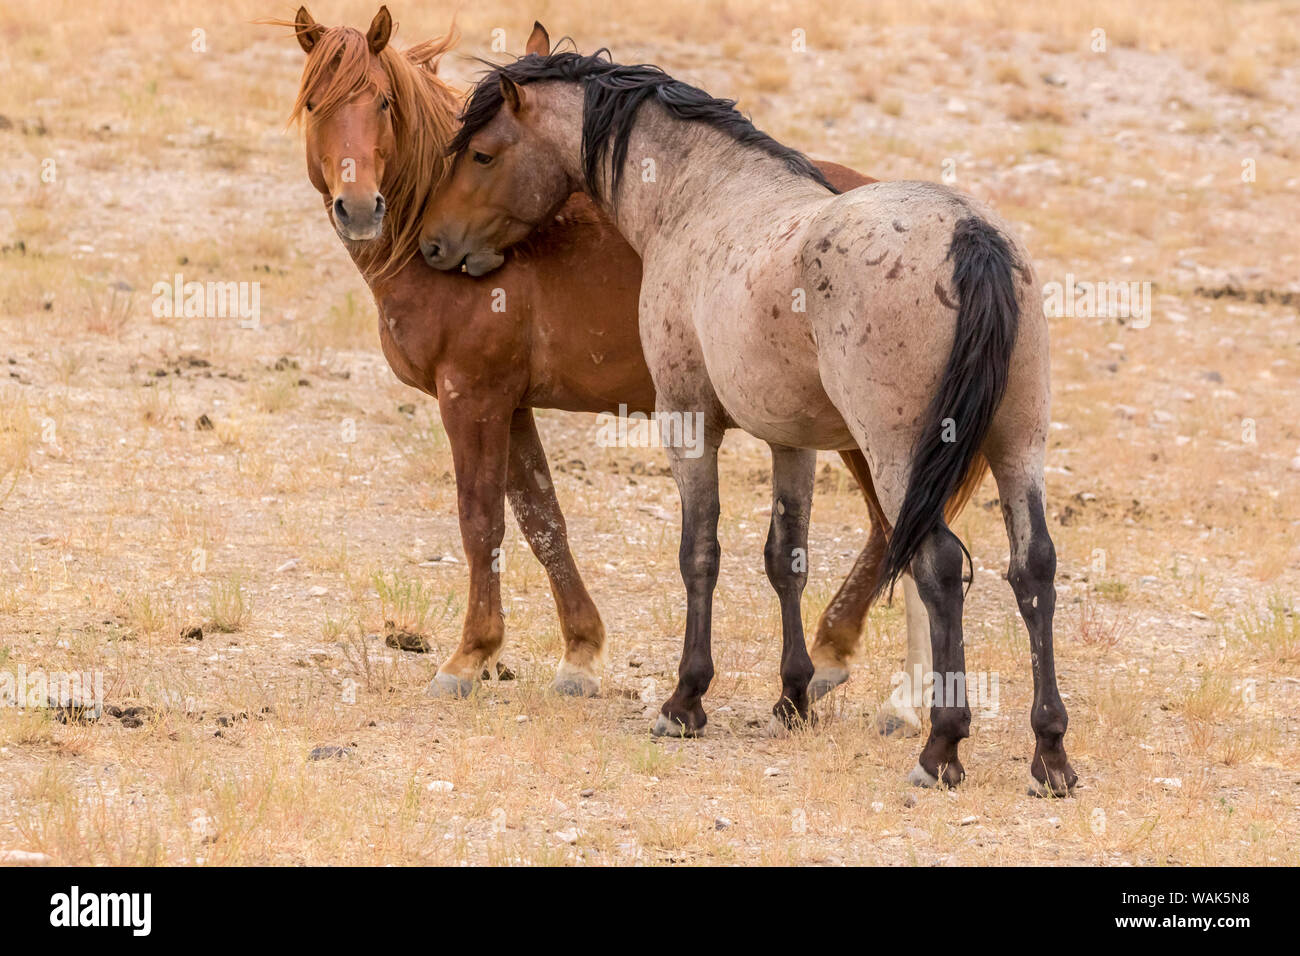 USA, Utah, Tooele County. Wild horse stallions close-up. Credit as: Cathy and Gordon Illg / Jaynes Gallery / DanitaDelimont.com Stock Photo